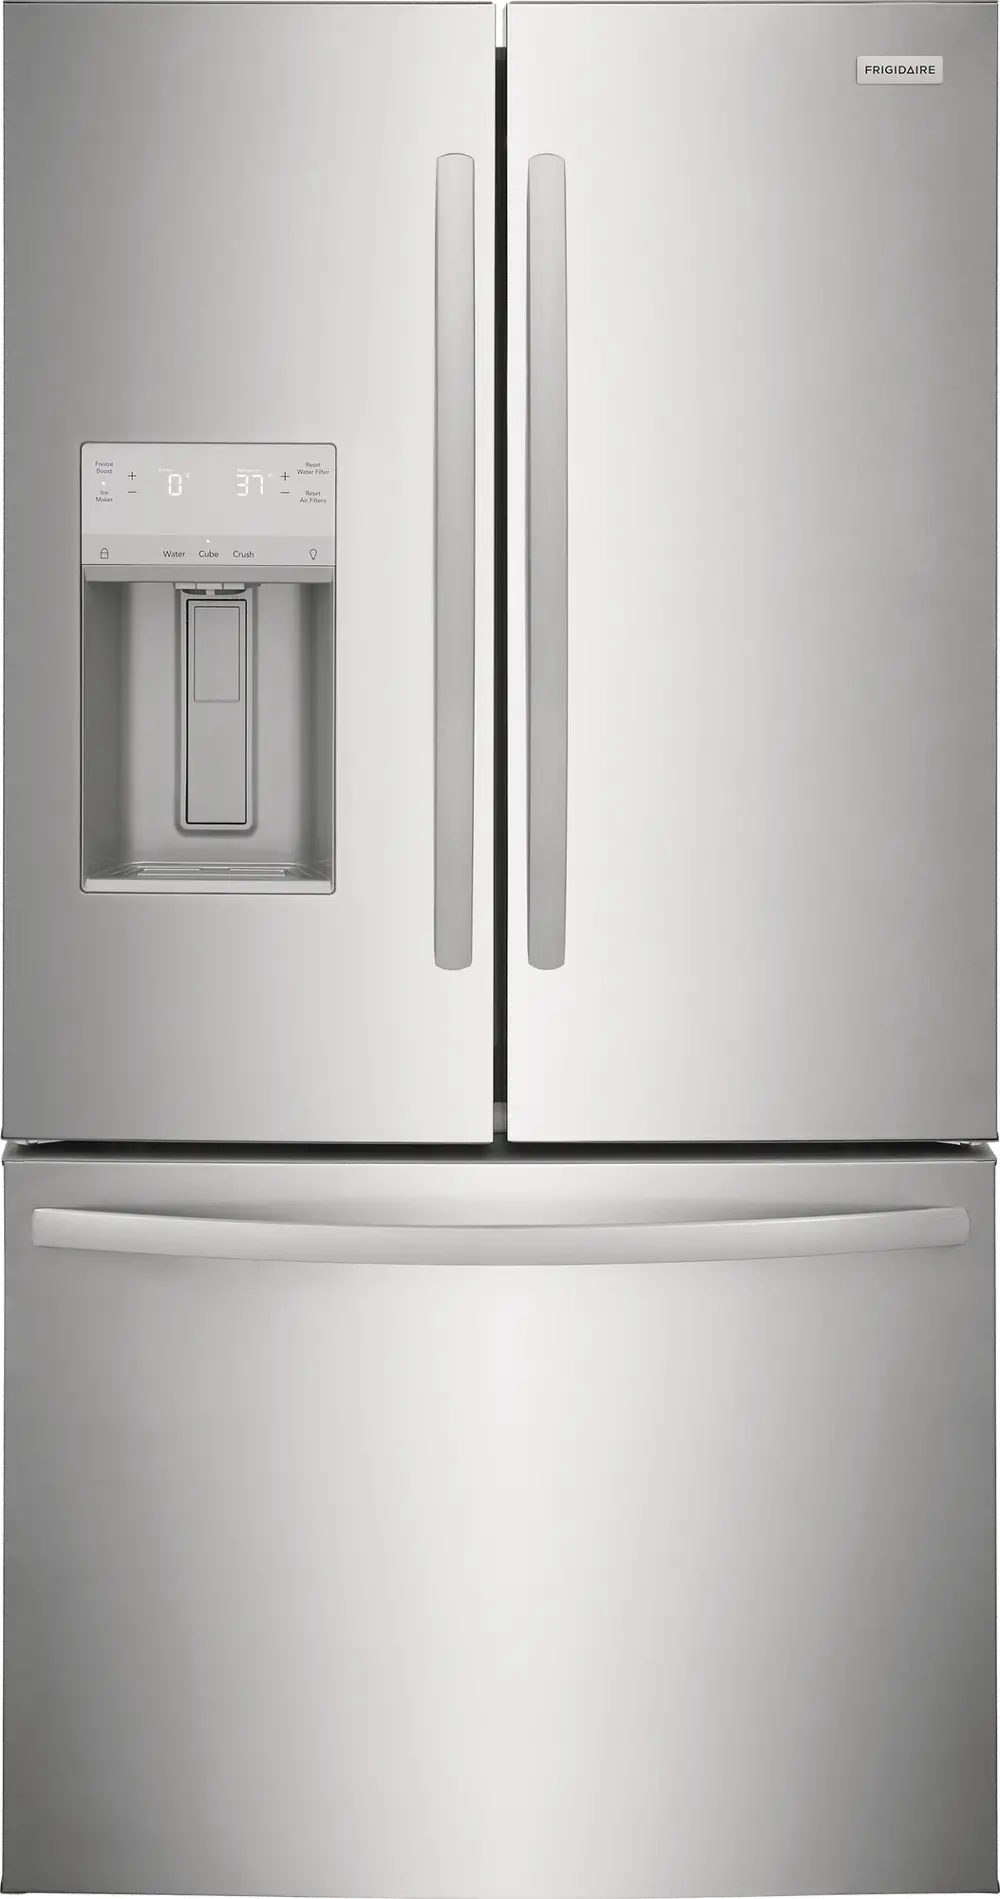 FRFS2823AS Frigidaire 27.8 cu ft French Door Refrigerator - Stainless Steel-1